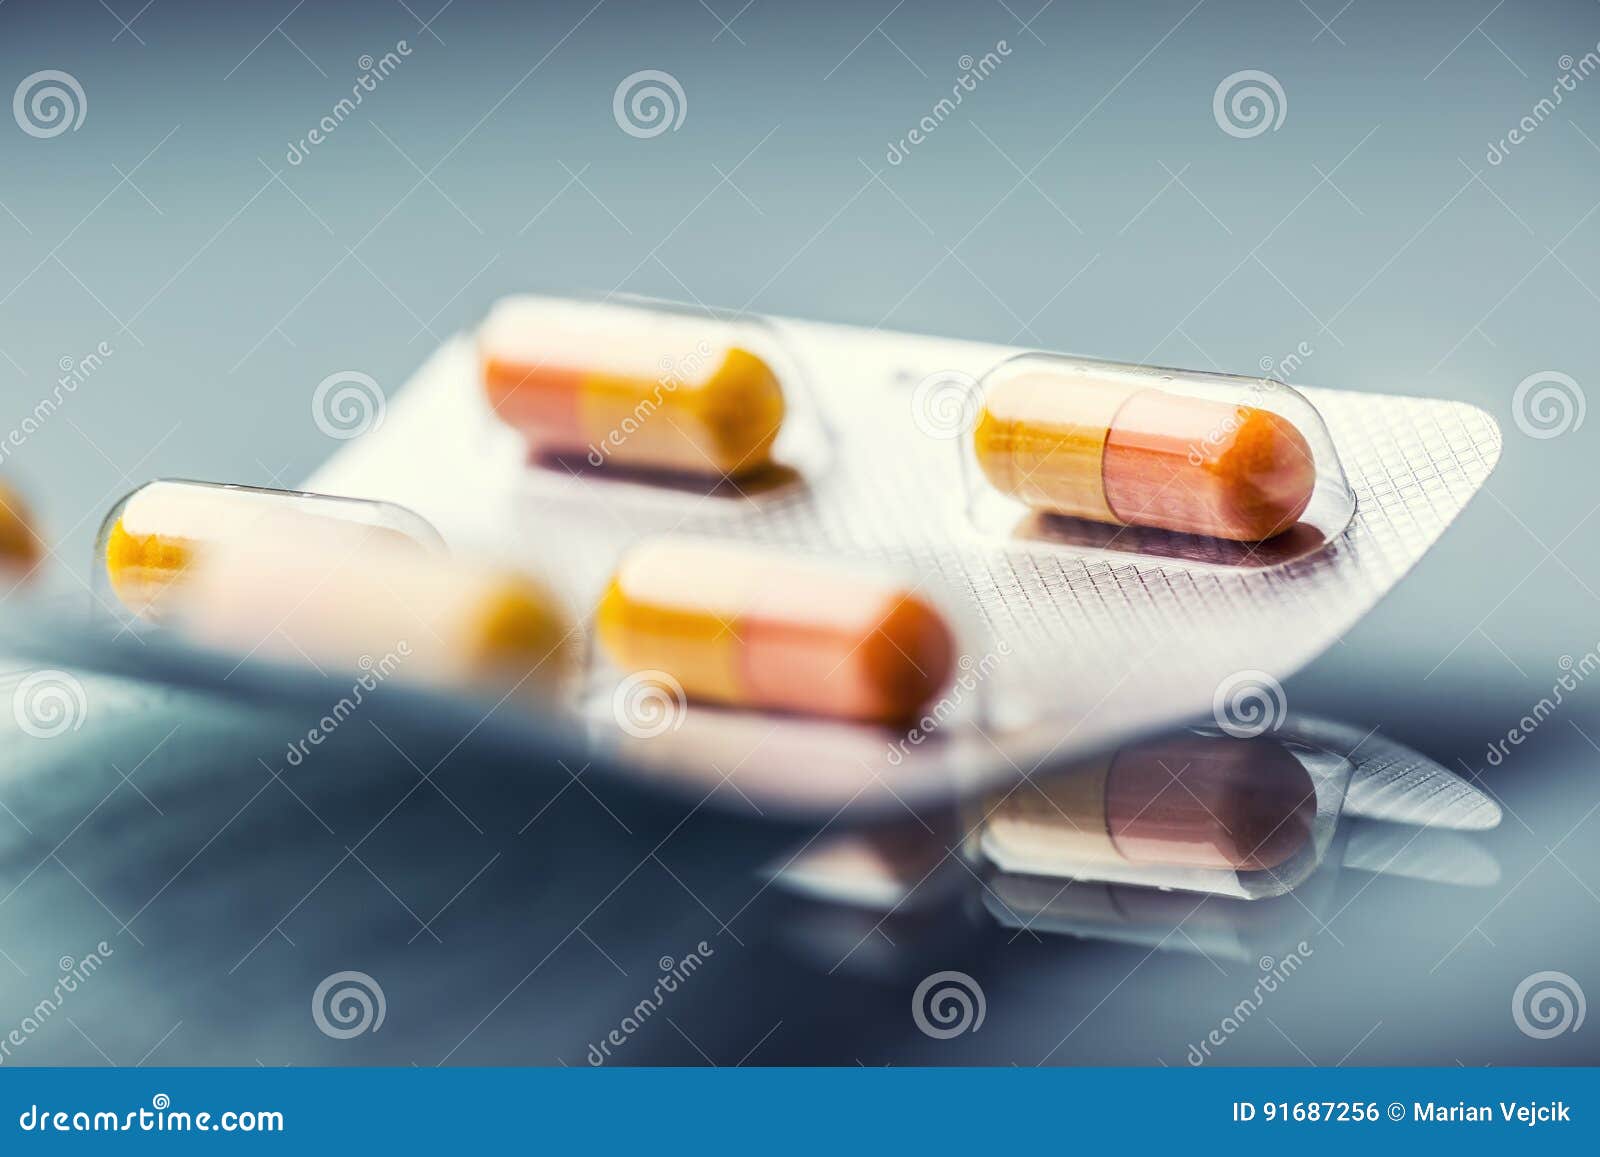 pills tablets capsule or medicament freely laid on glass background